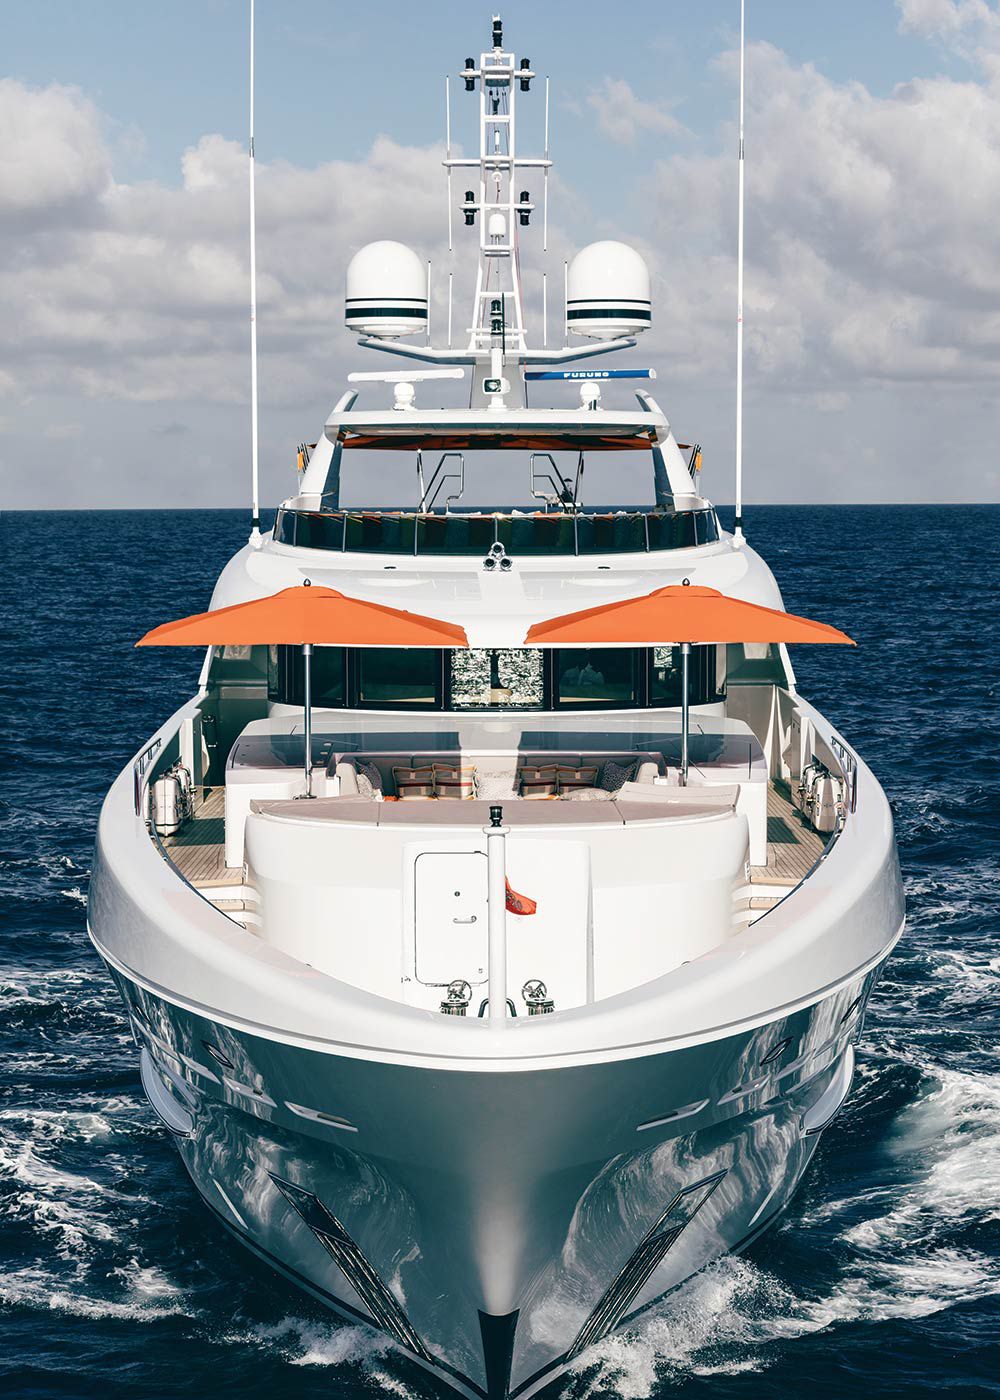 Meet The Owner Of The 154 Foot Heesen Book Ends Yachting